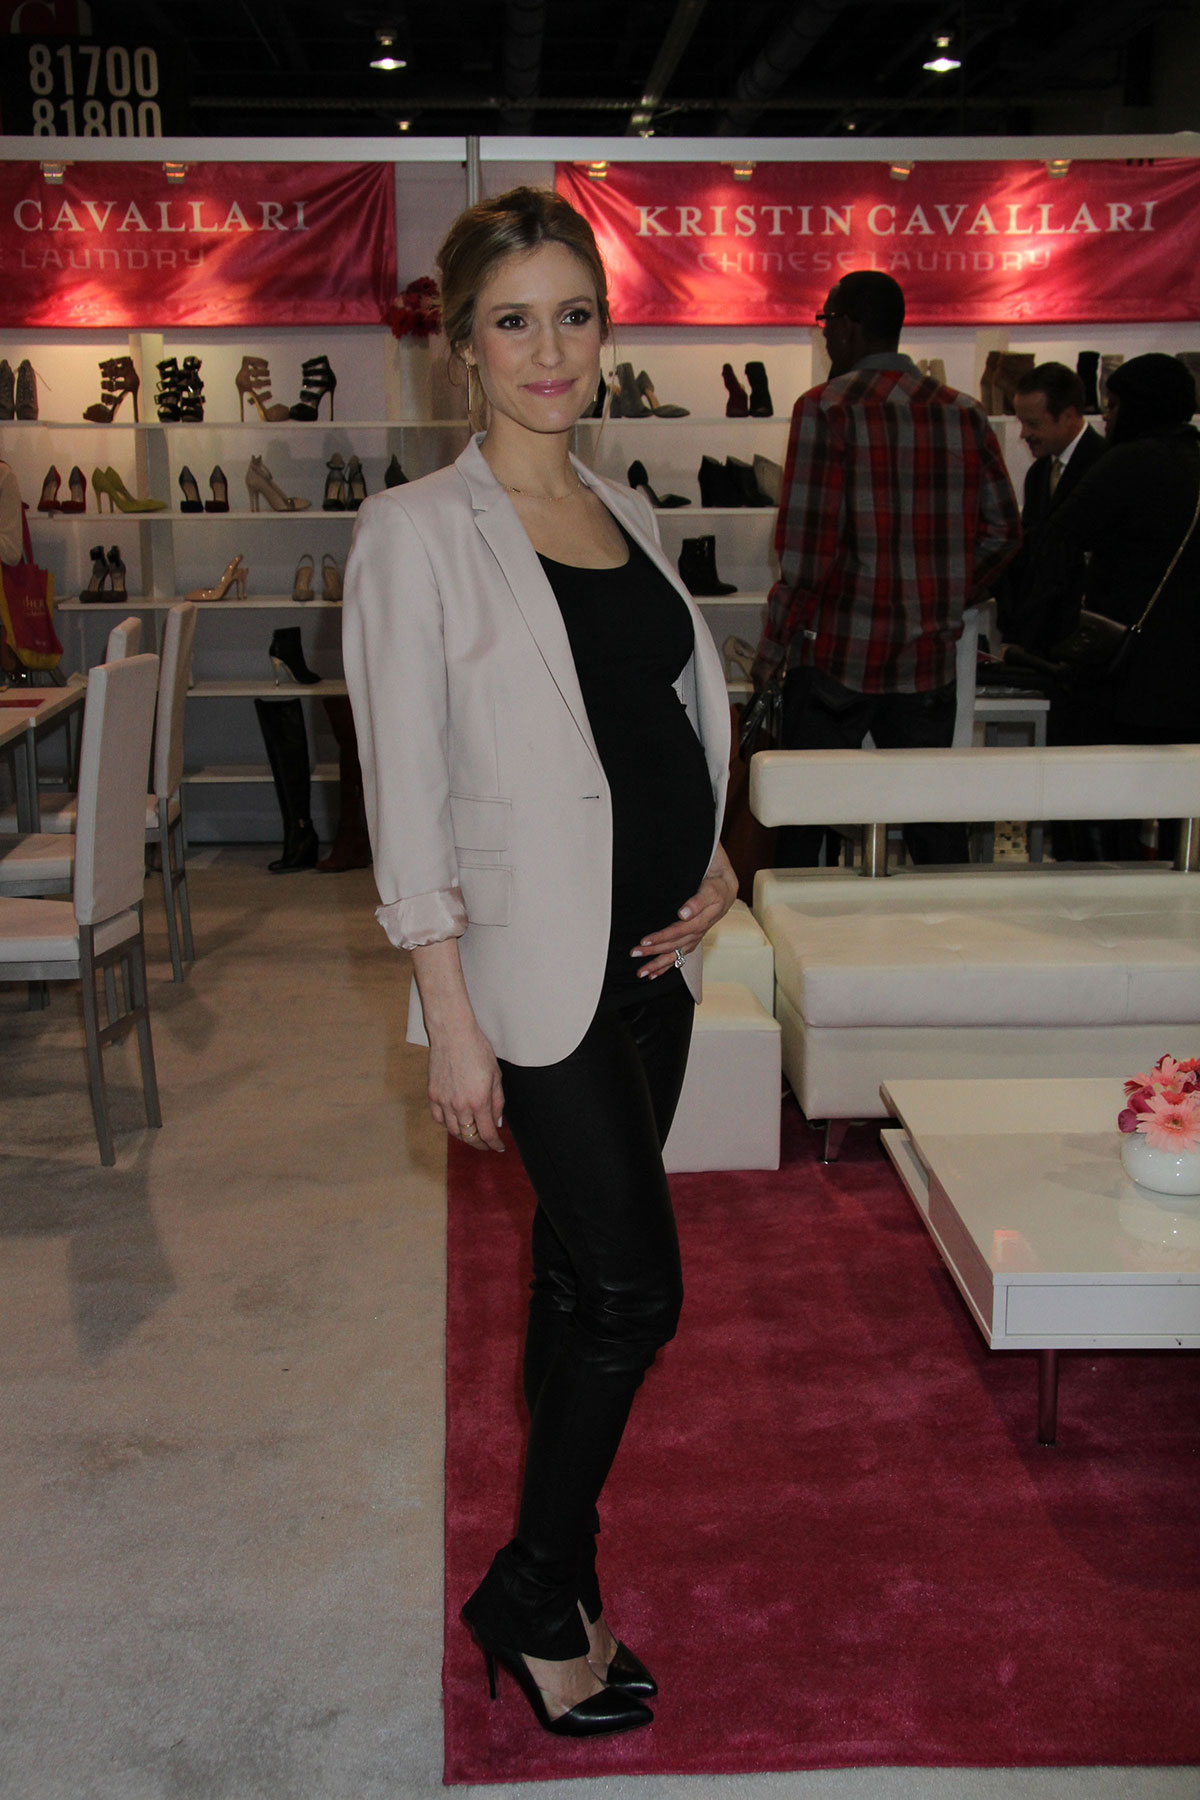 Kristin Cavallari appearance for her shoe line for Chinese Laundry